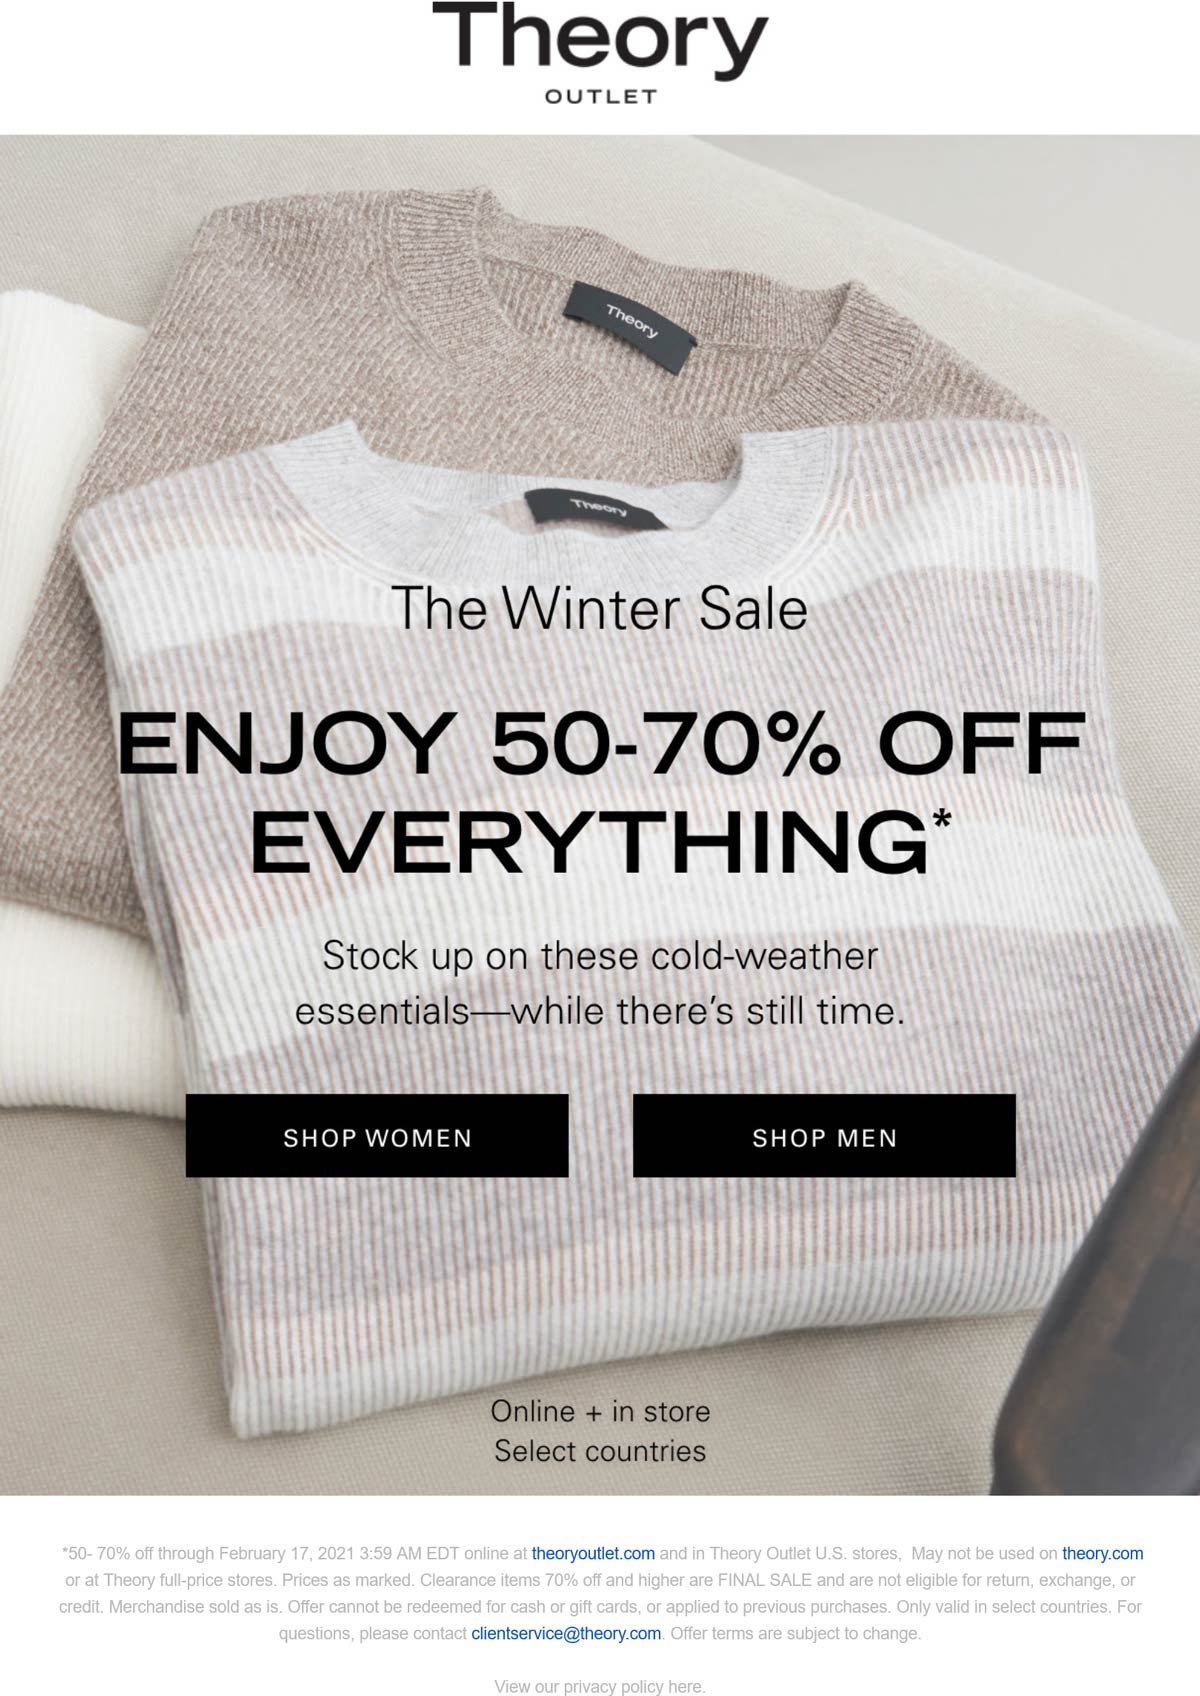 5070 off everything at Theory Outlet, ditto online theoryoutlet